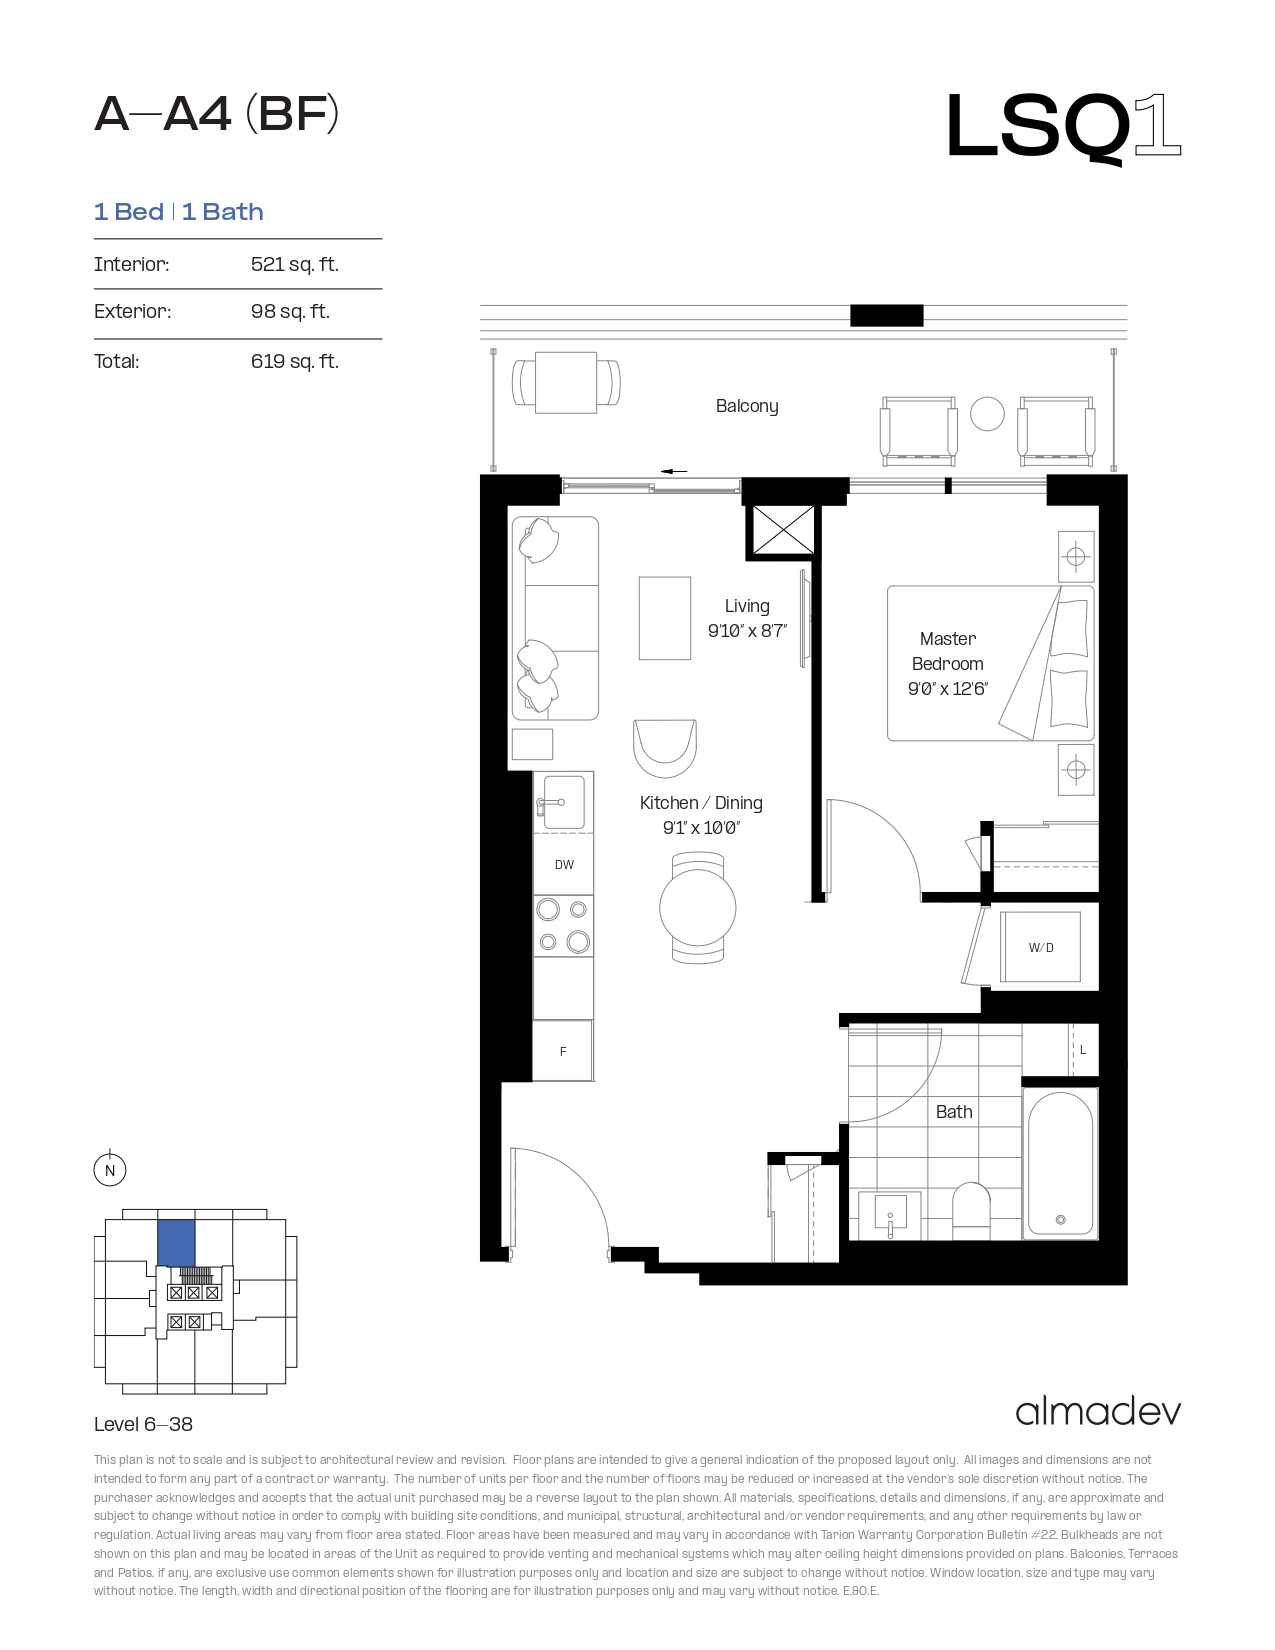 A-A4(BF) Floor Plan of LSQ Condos with undefined beds